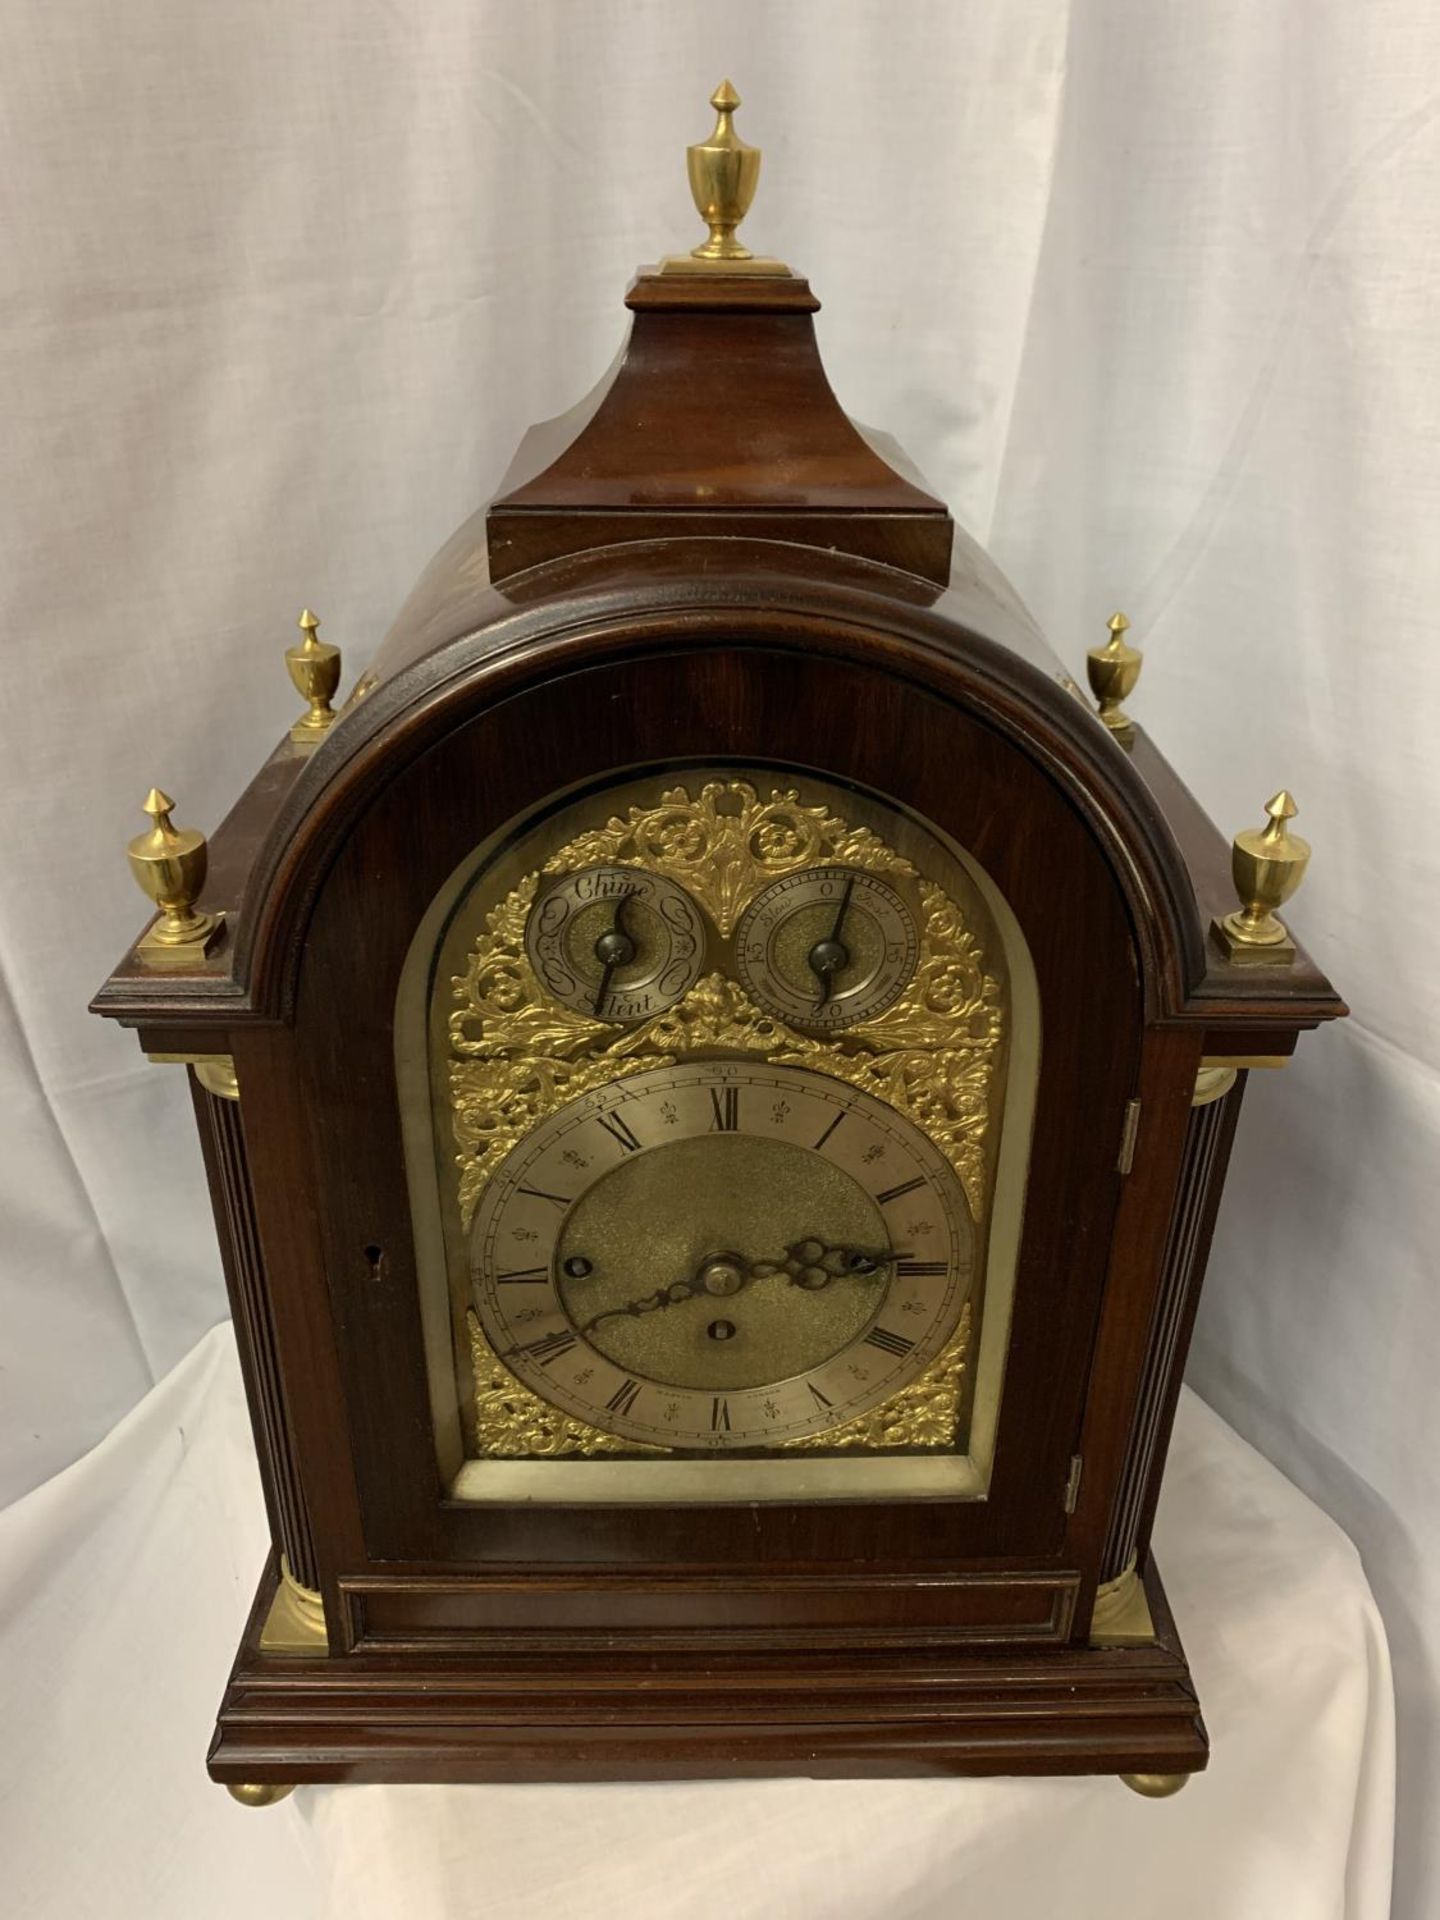 A CIRCA 1890 MAHOGANY BRACKET CLOCK BY MARTIN OF LONDON, HAVING EIGHT DAY MOVEMENT WITH STRIKING AND